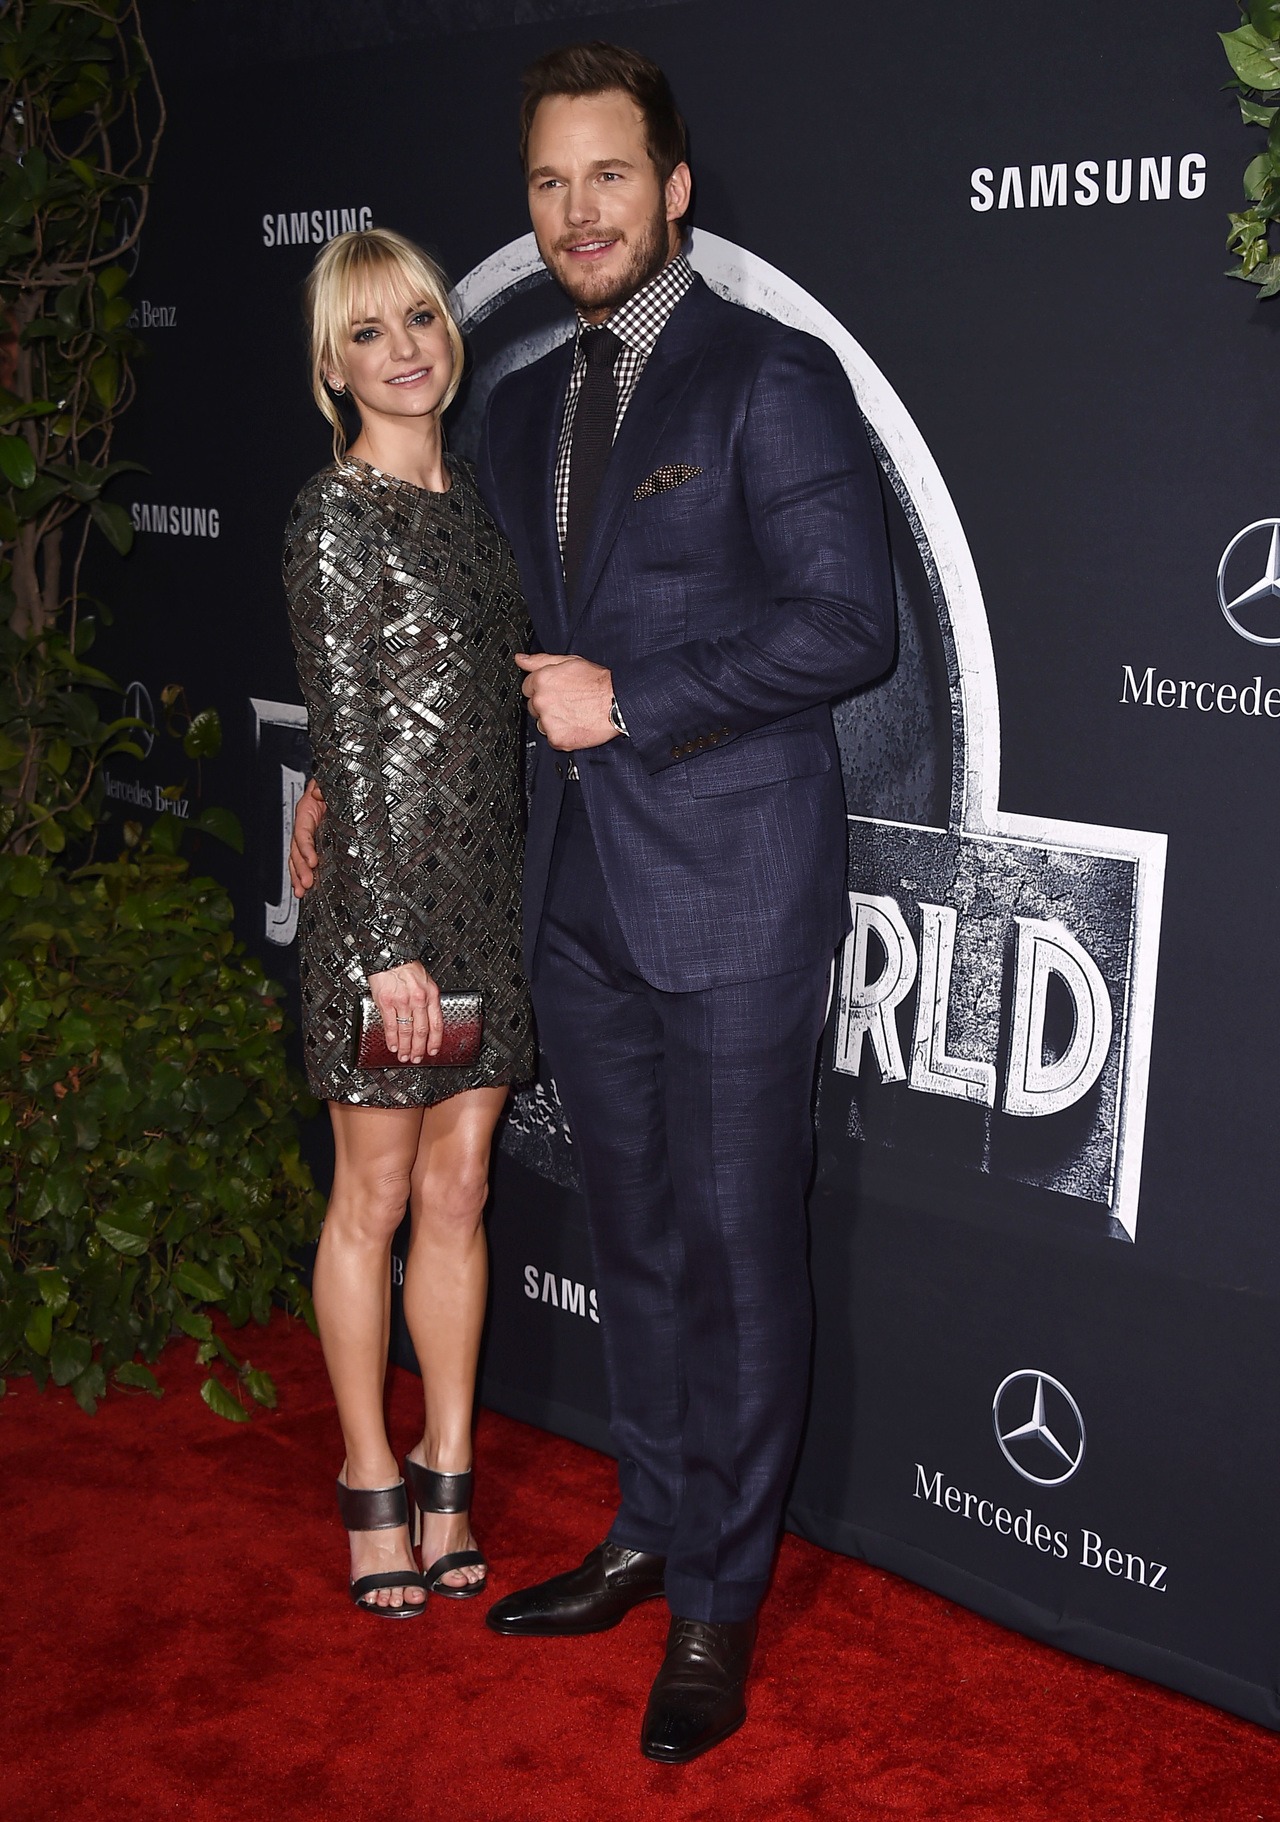 Anna Faris and Chris Pratt are both from Snohomish County — clearly our county is doing something right.